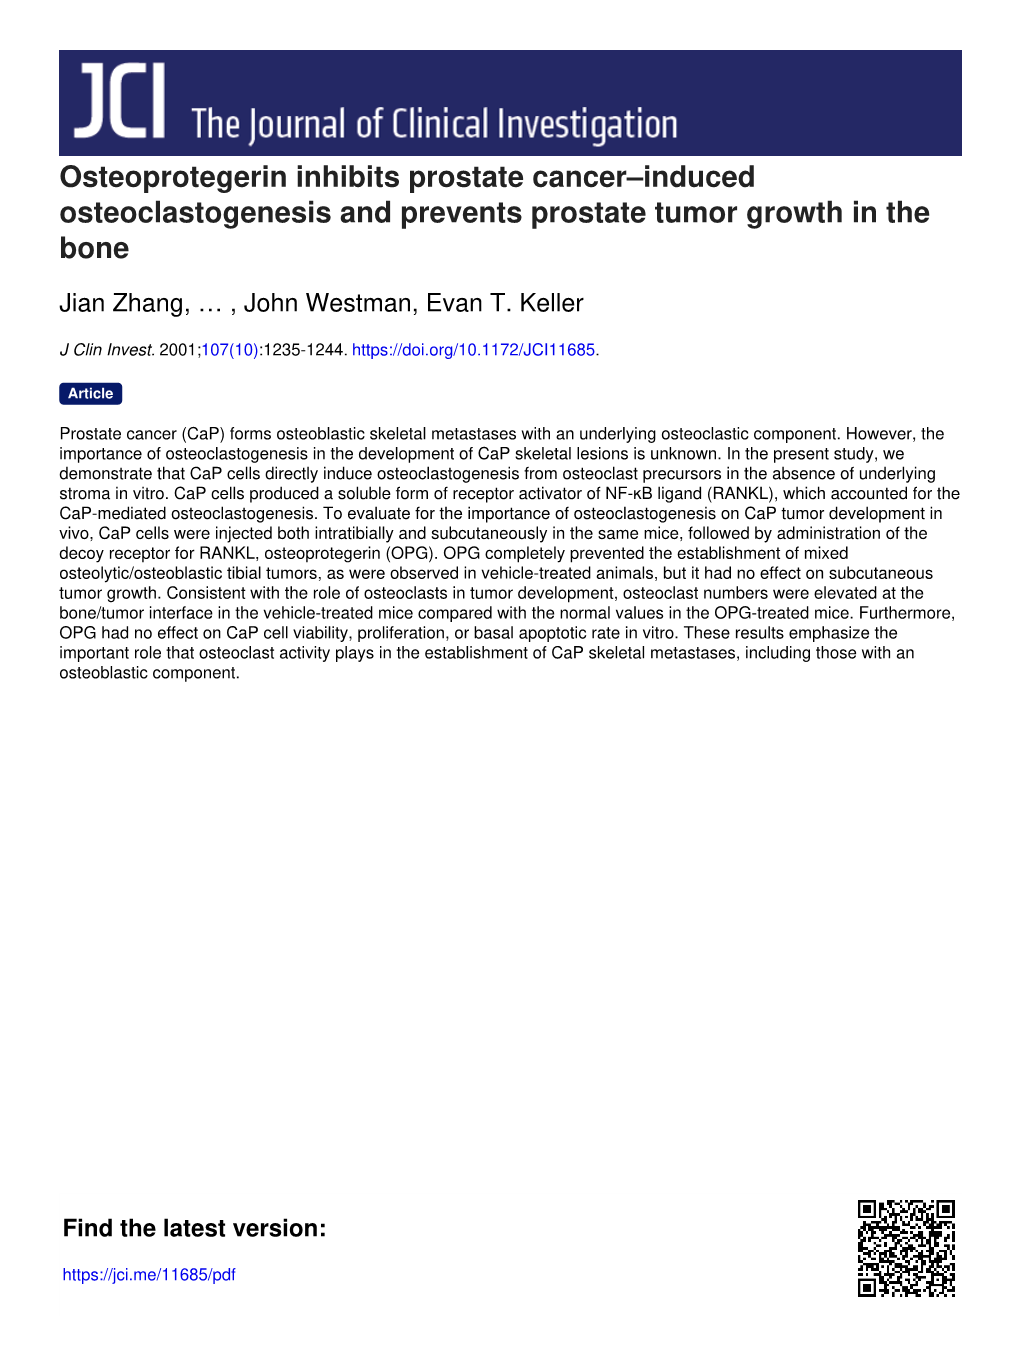 Osteoprotegerin Inhibits Prostate Cancer–Induced Osteoclastogenesis and Prevents Prostate Tumor Growth in the Bone